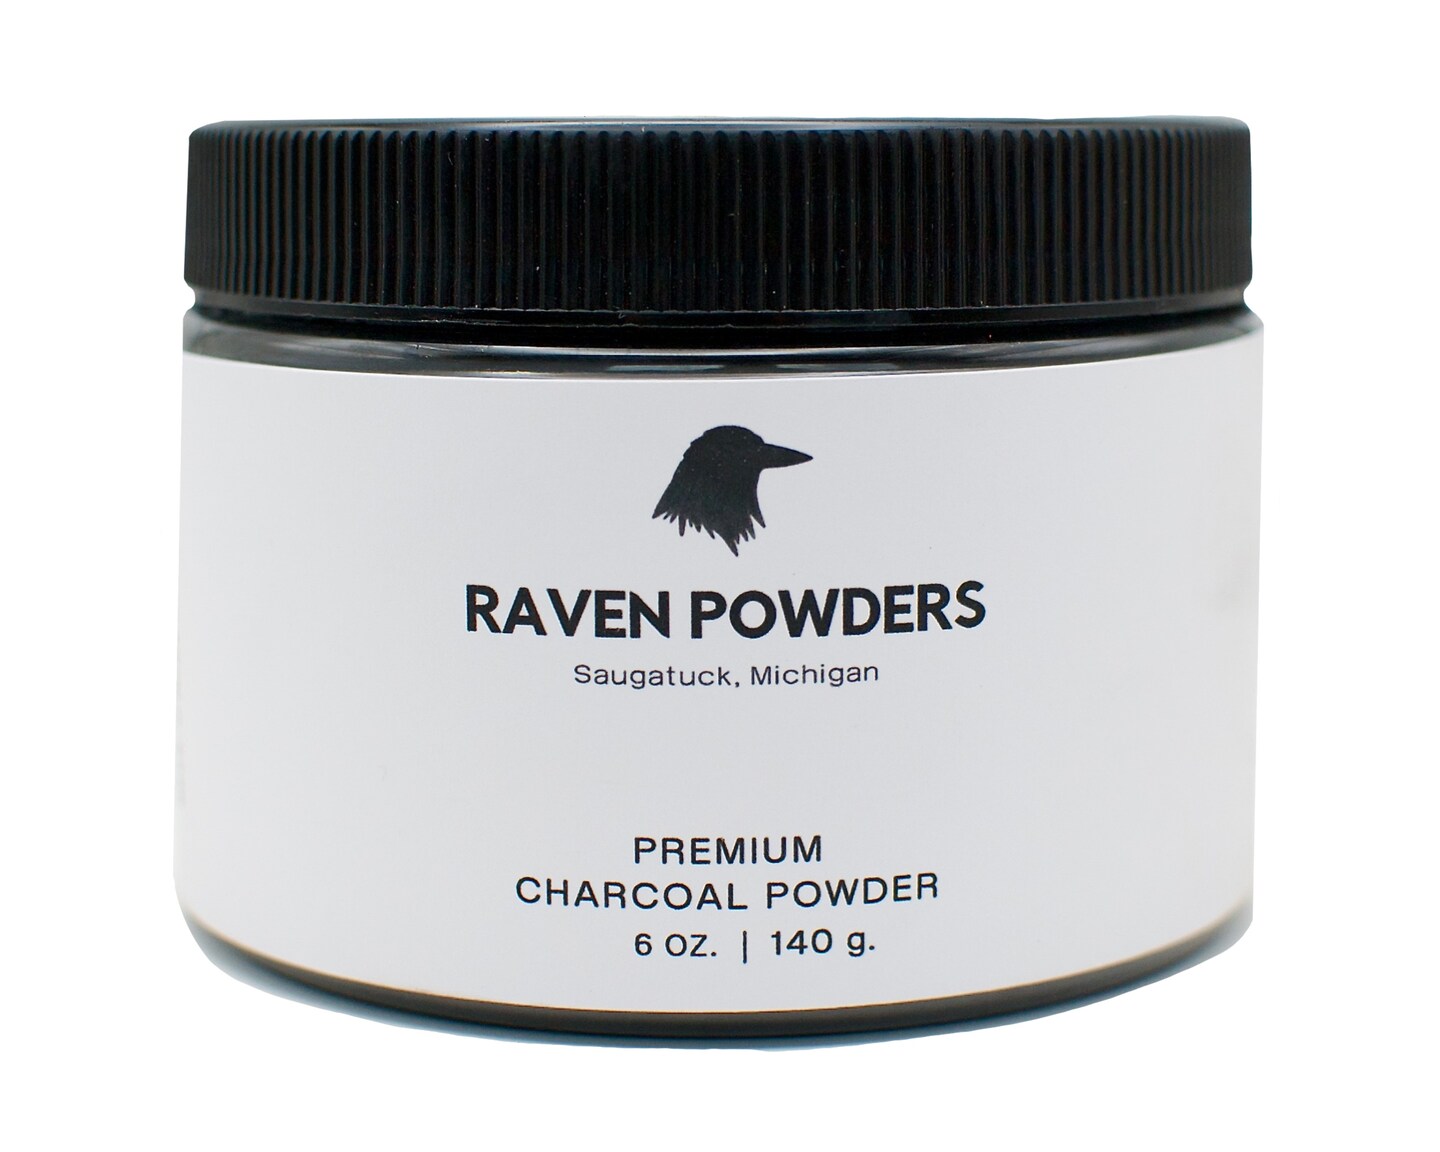 Raven Powders Premium Charcoal Powder for Drawing and Art, Black